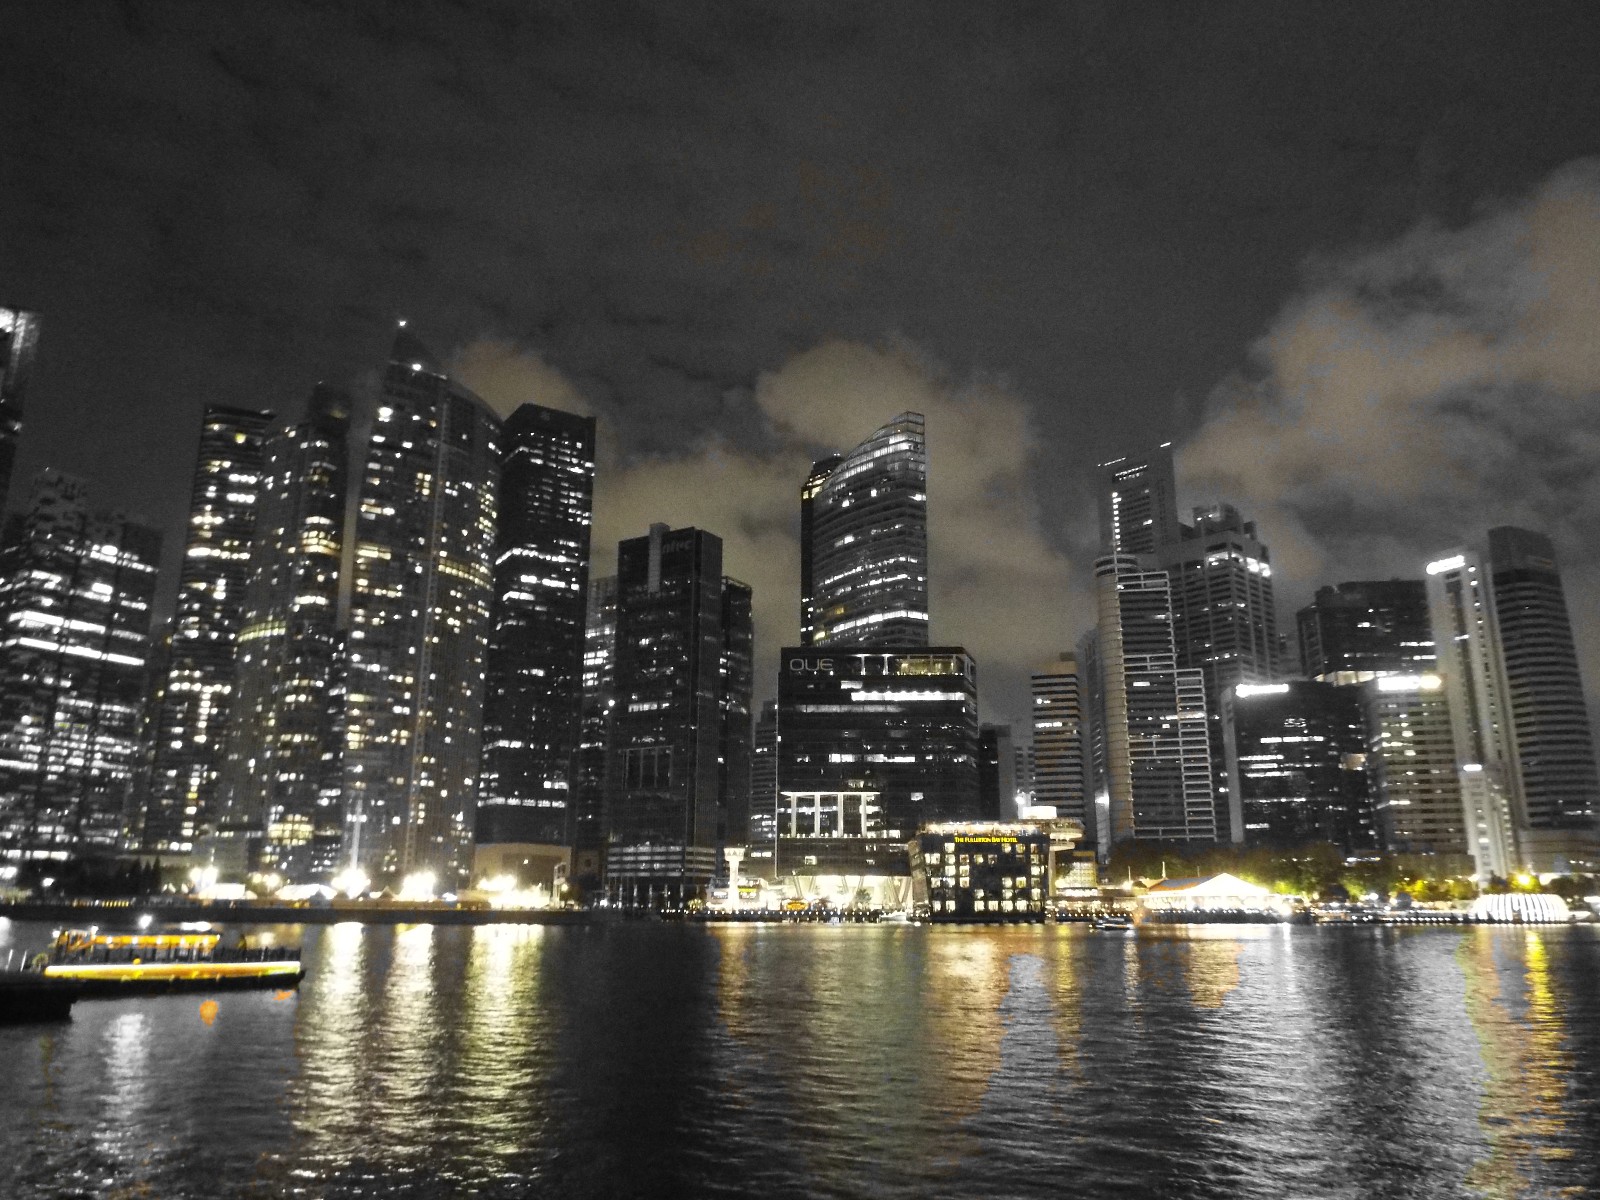 Singapore by night, cities | City | Night | River | Building | Architecture | Dark | Boats | Singapore | World | Travel | Water